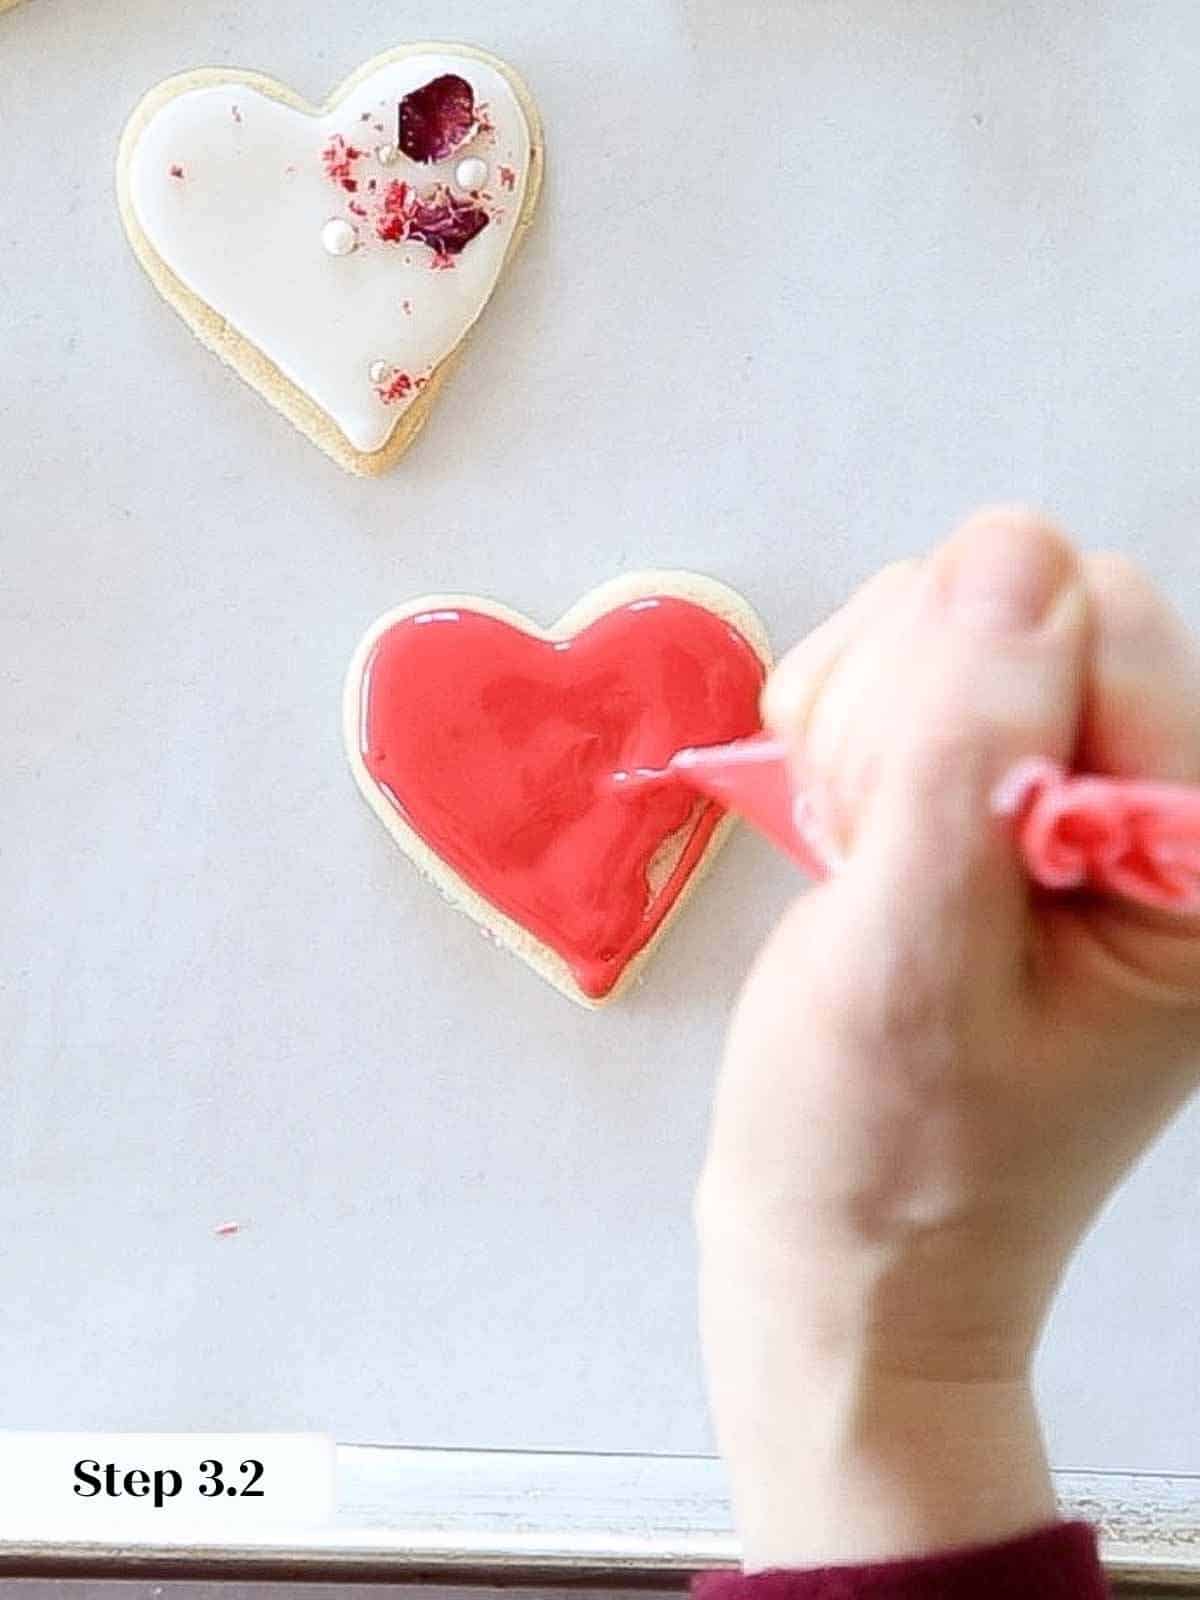 flooding red royal icing on heart shaped sugar cookie.